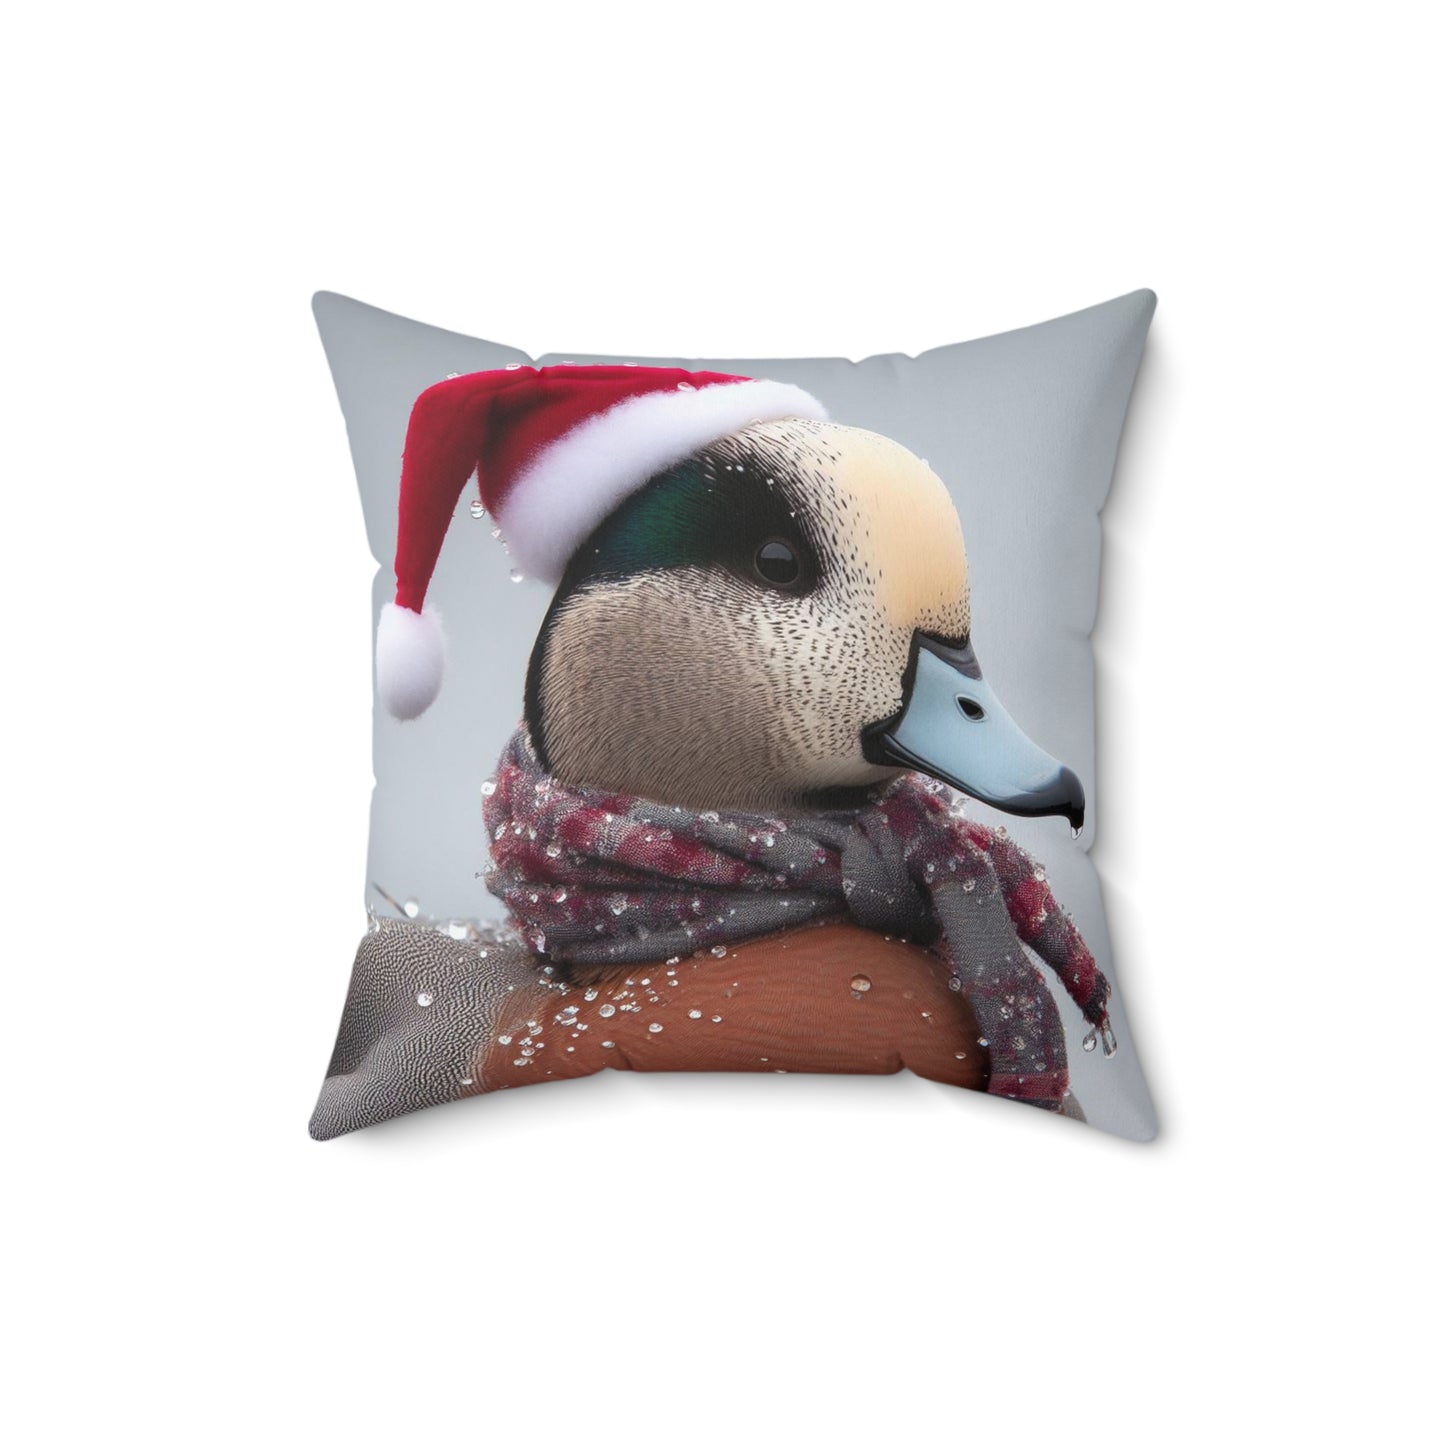 Wigeon Holiday Pillow